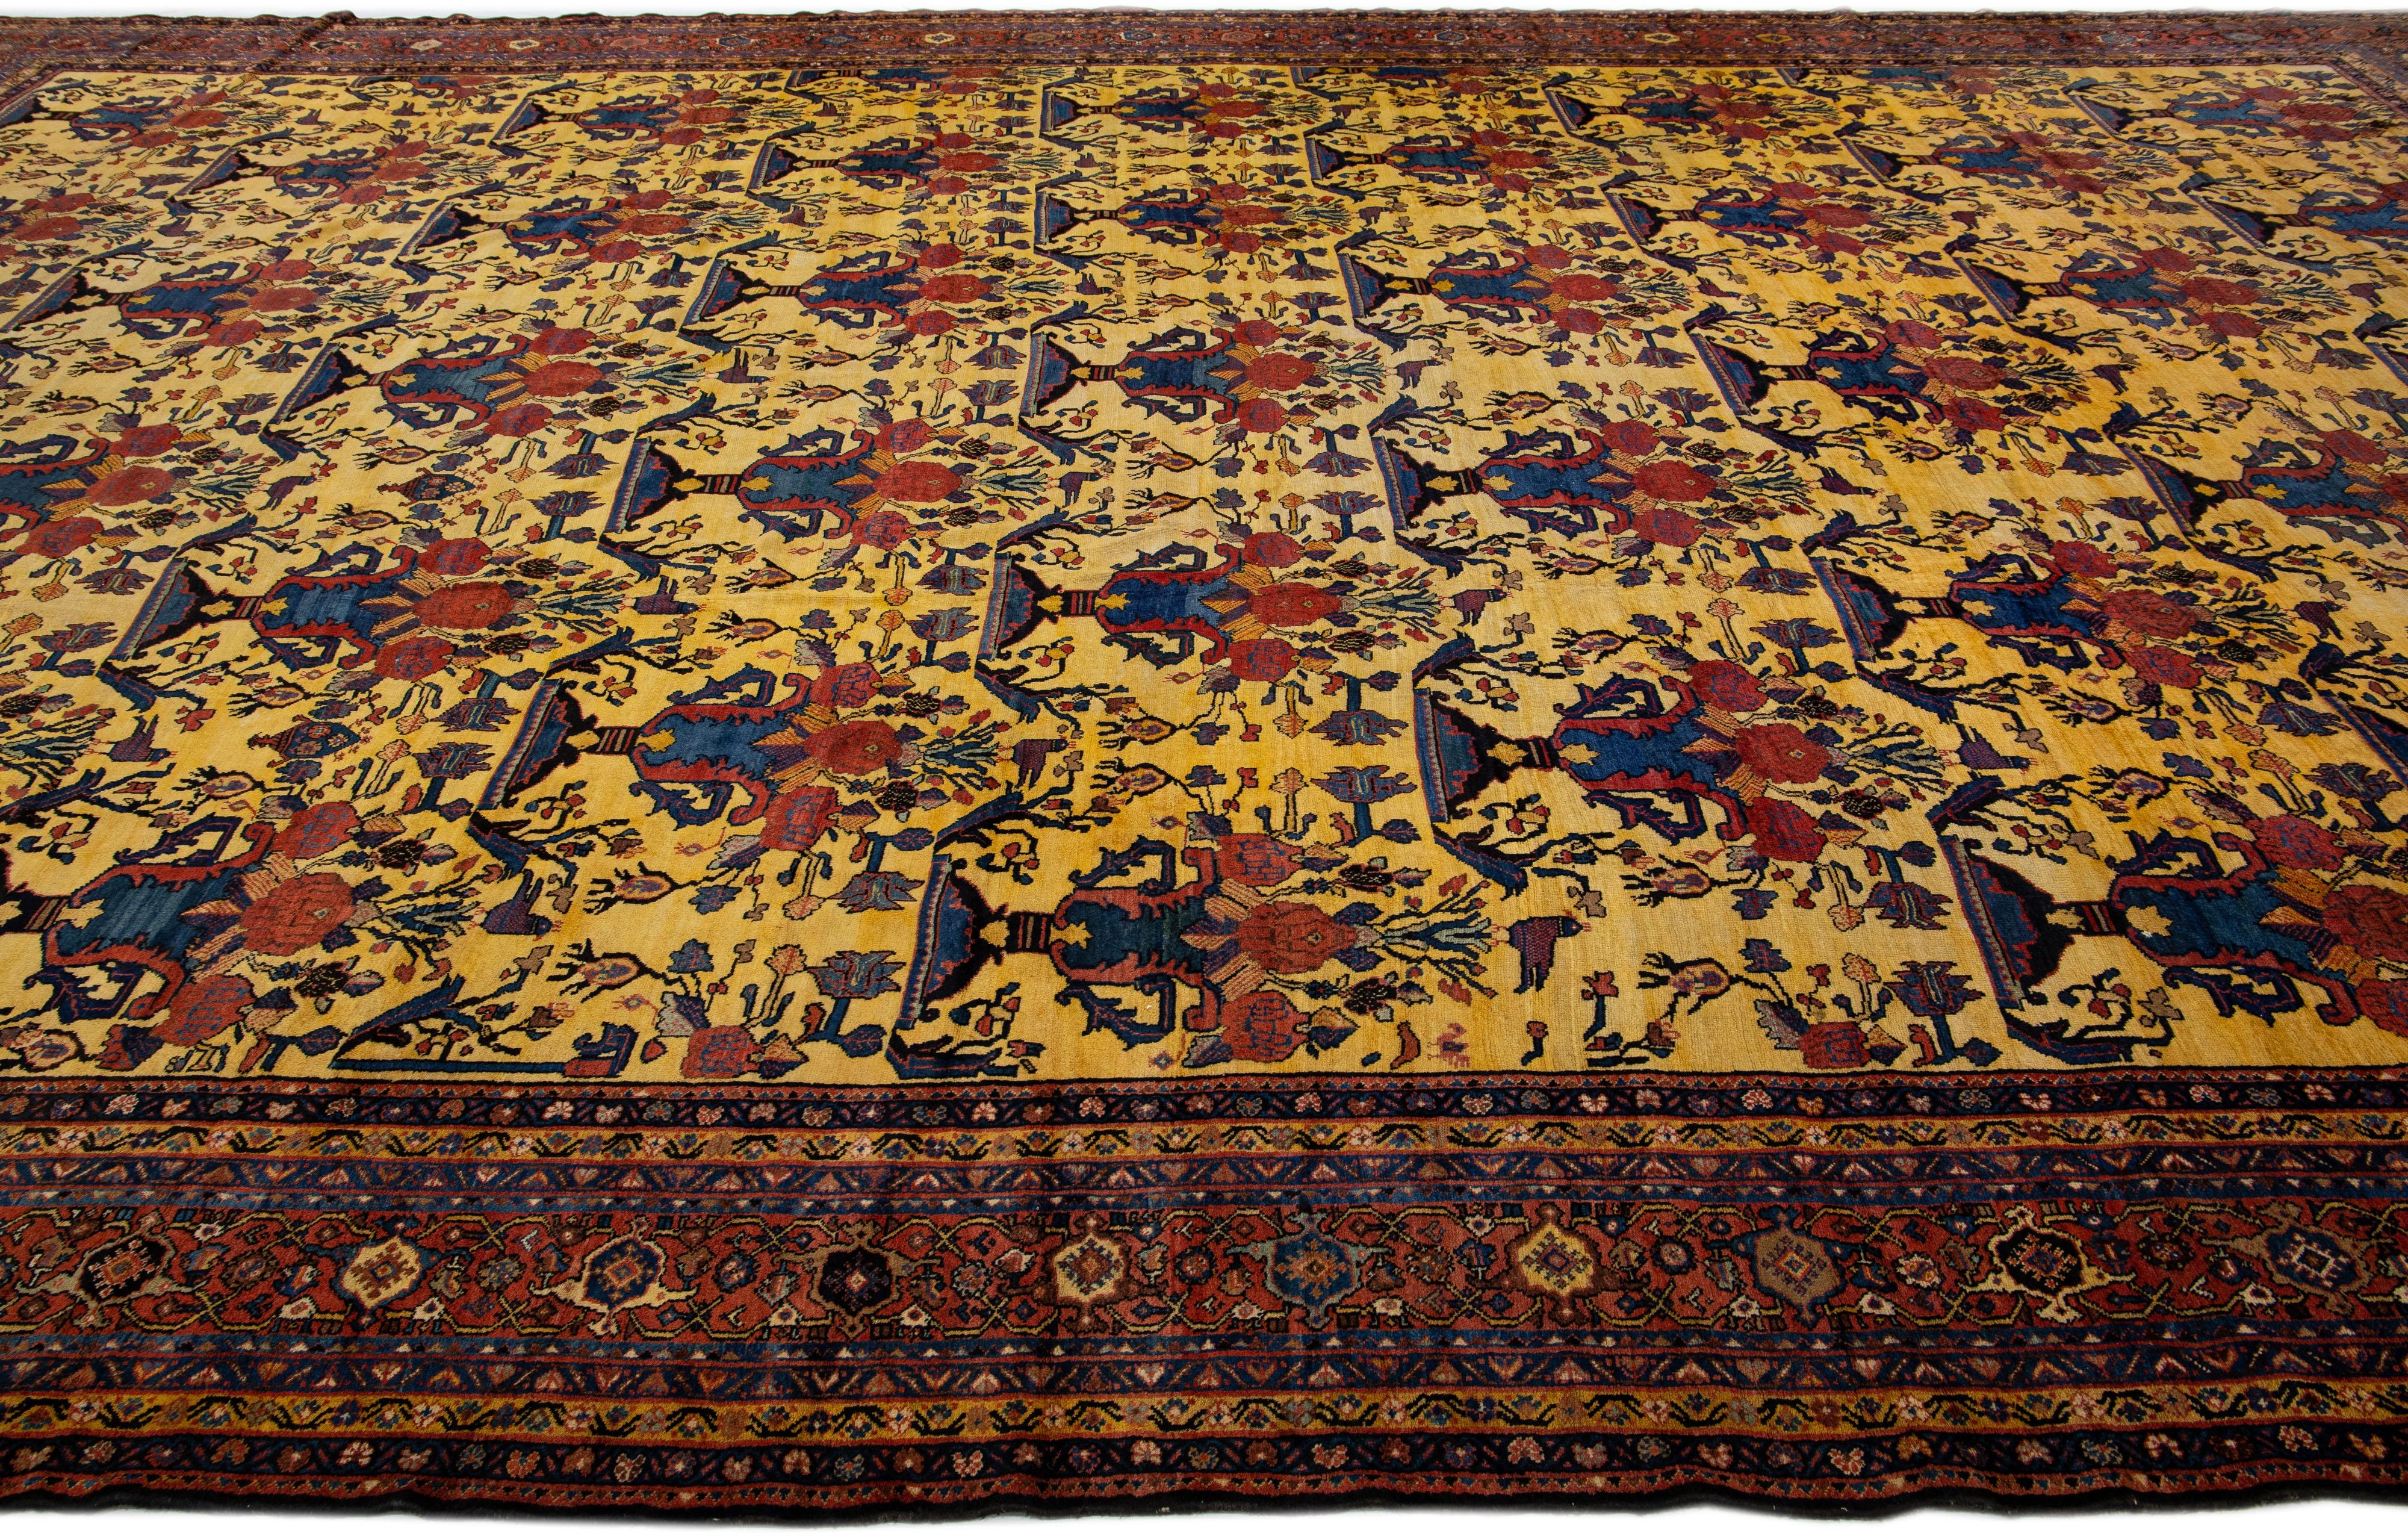 Oversize Antique Bakhtiari Persian Handmade Yellow Wool Rug with Allover Motif In Good Condition For Sale In Norwalk, CT